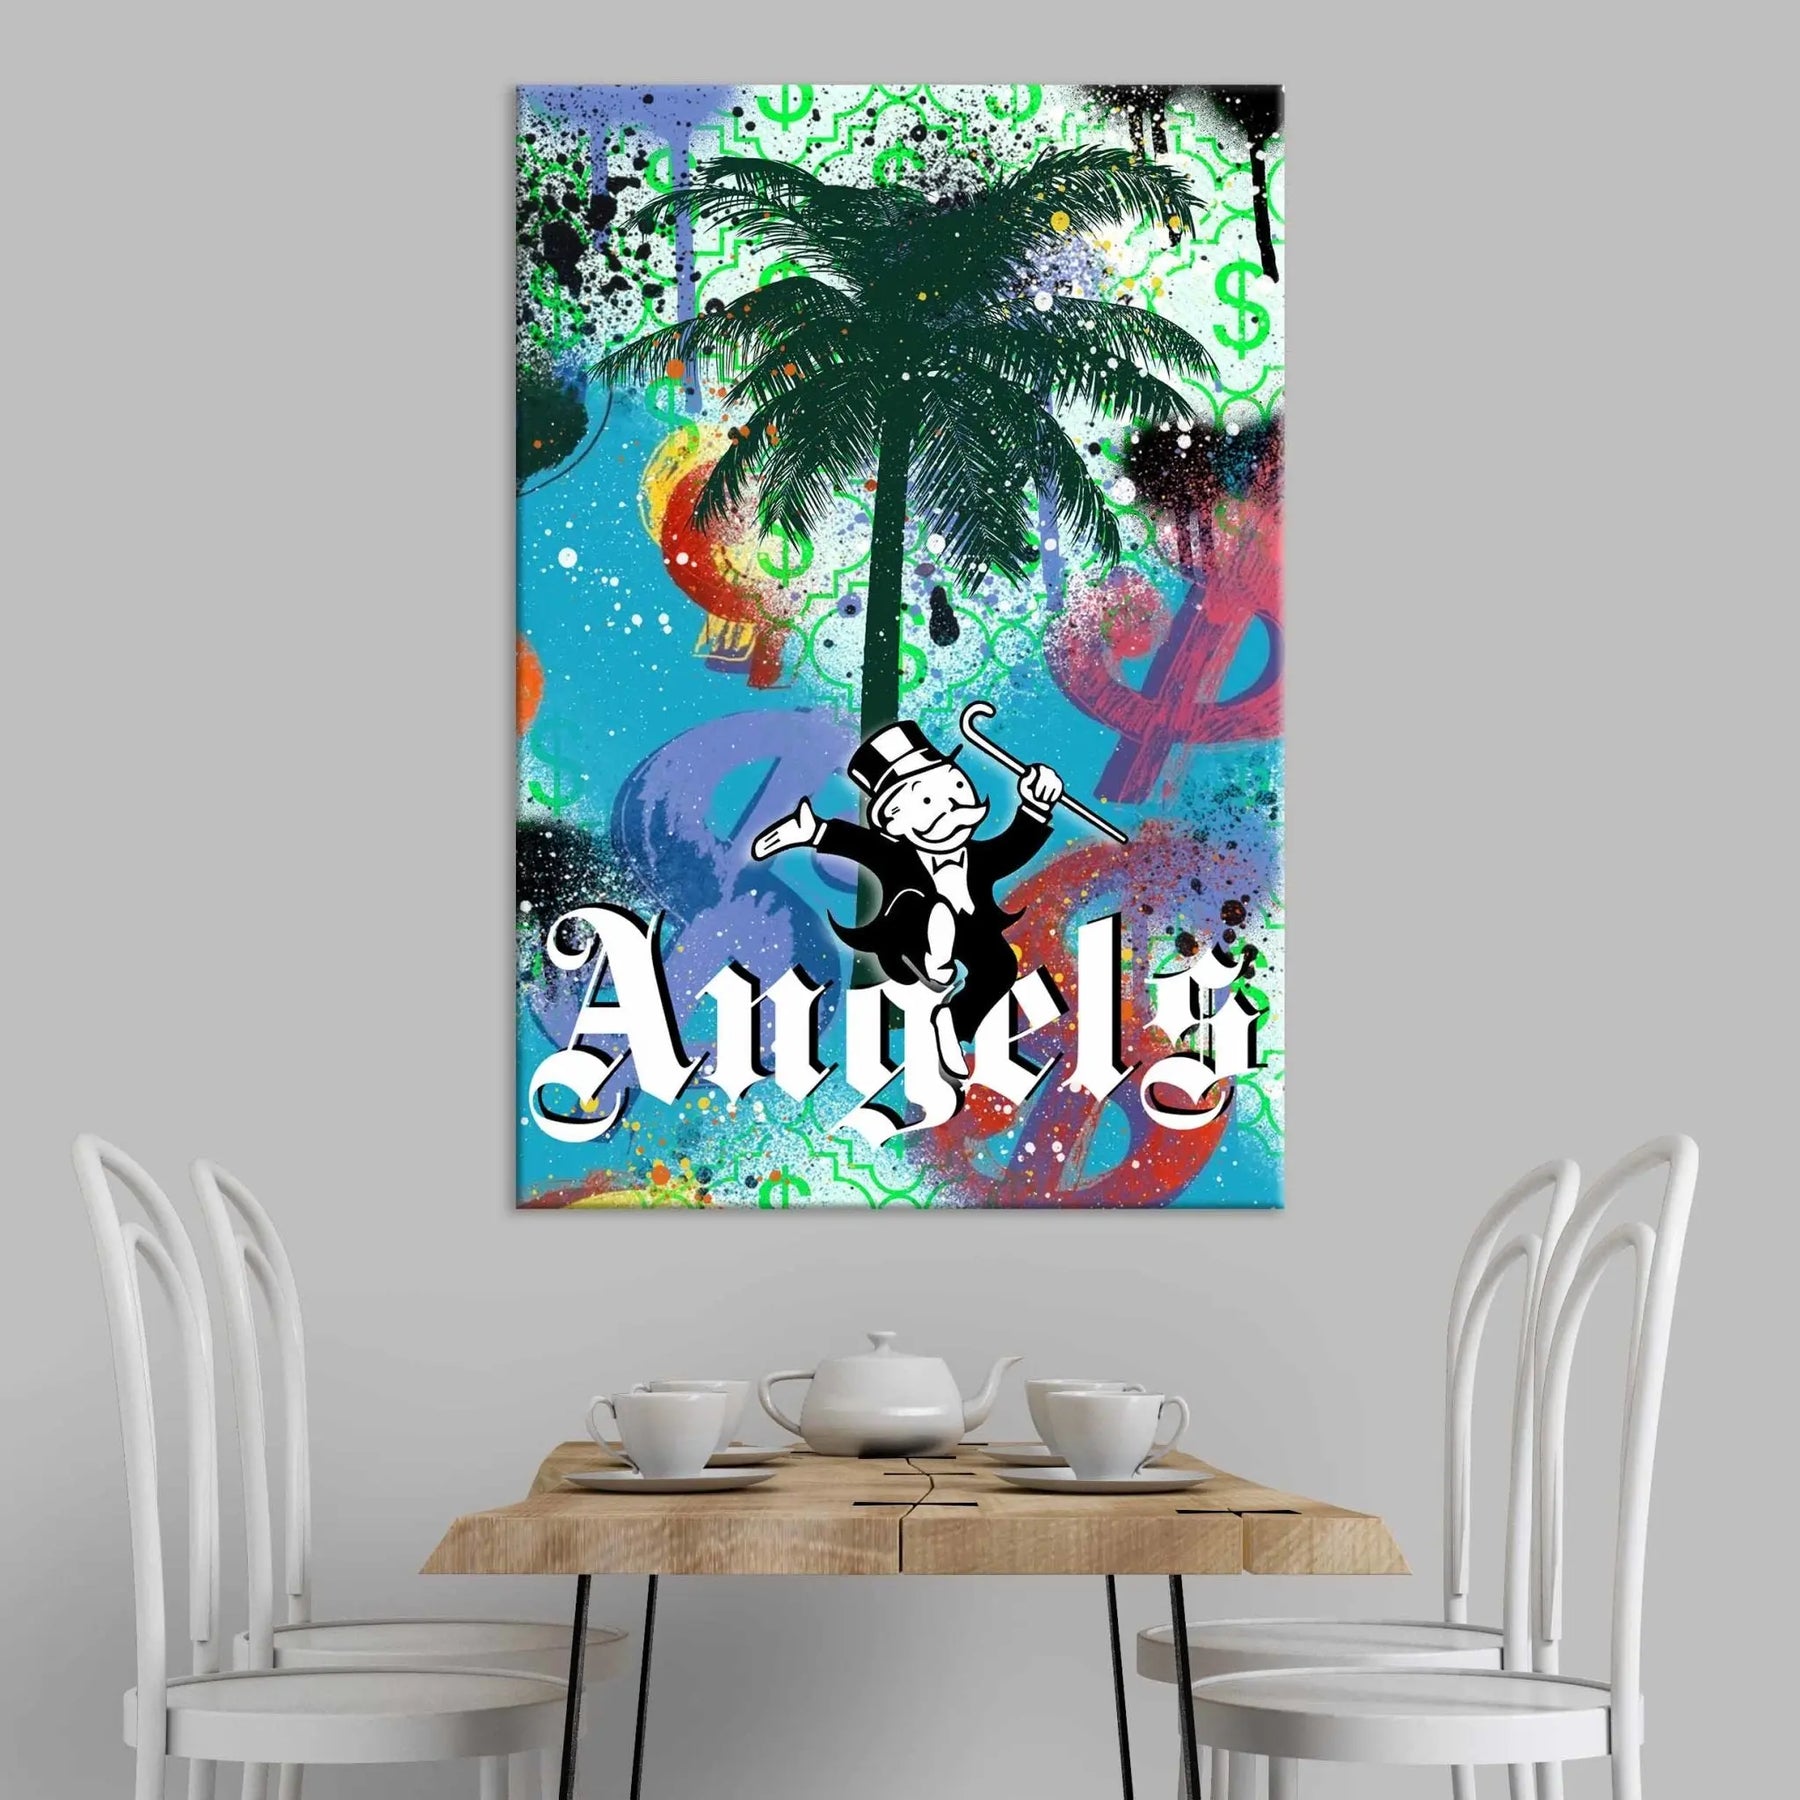 "ANGELS" - Art For Everyone